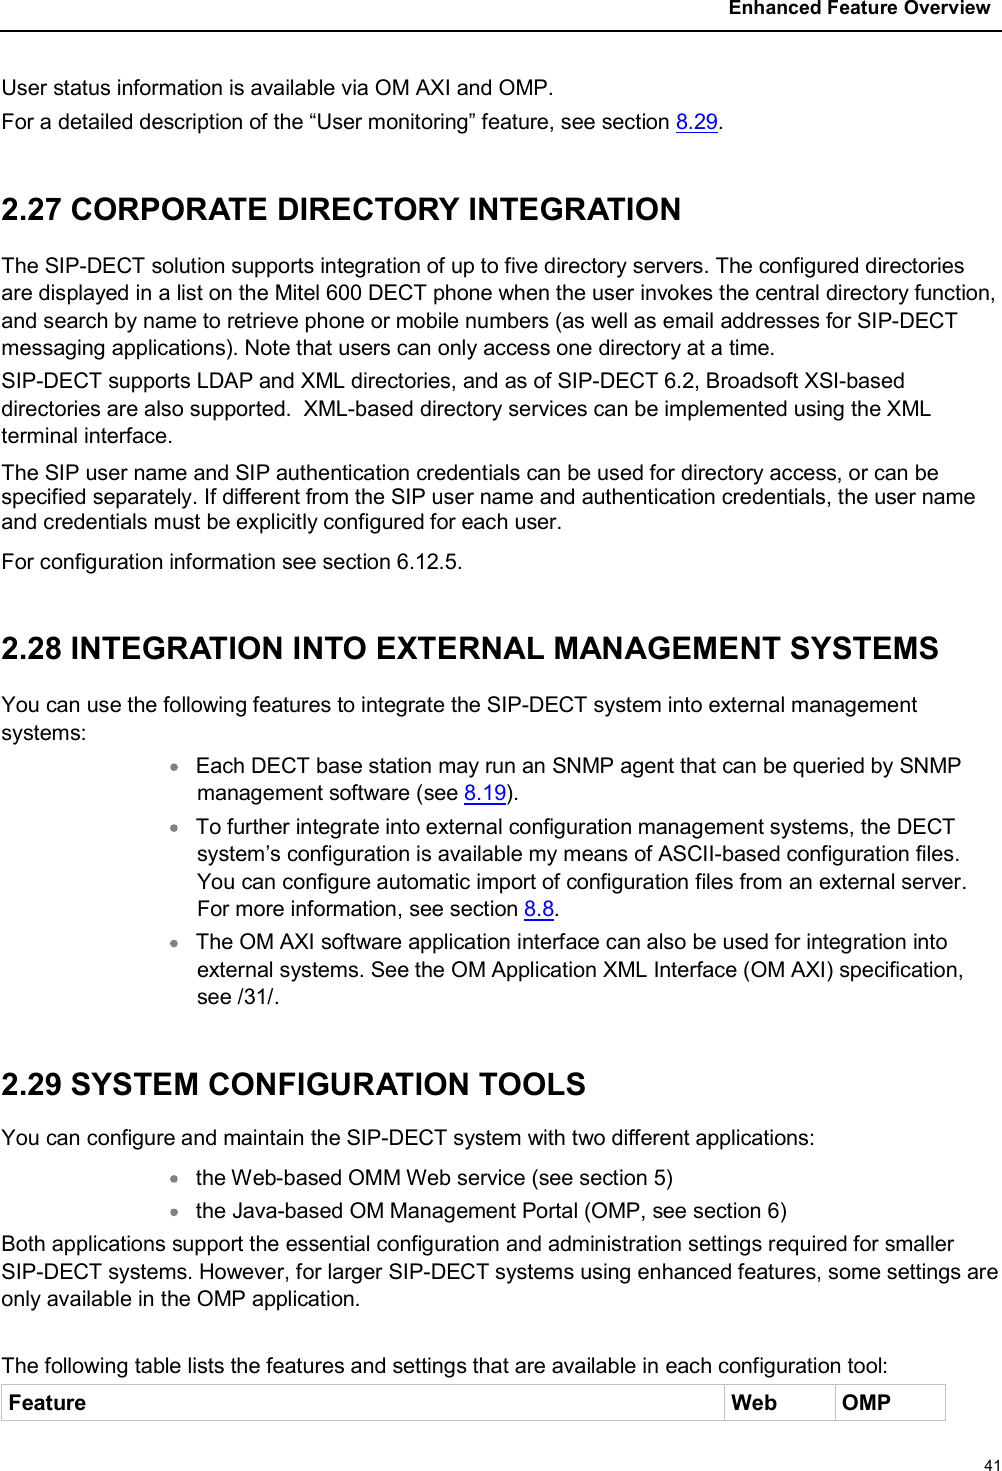 Enhanced Feature Overview41User status information is available via OM AXI and OMP. For a detailed description of the “User monitoring” feature, see section 8.29.2.27 CORPORATE DIRECTORY INTEGRATIONThe SIP-DECT solution supports integration of up to five directory servers. The configured directories are displayed in a list on the Mitel 600 DECT phone when the user invokes the central directory function, and search by name to retrieve phone or mobile numbers (as well as email addresses for SIP-DECT messaging applications). Note that users can only access one directory at a time.SIP-DECT supports LDAP and XML directories, and as of SIP-DECT 6.2, Broadsoft XSI-based directories are also supported.  XML-based directory services can be implemented using the XML terminal interface.The SIP user name and SIP authentication credentials can be used for directory access, or can be specified separately. If different from the SIP user name and authentication credentials, the user name and credentials must be explicitly configured for each user.For configuration information see section 6.12.5.2.28 INTEGRATION INTO EXTERNAL MANAGEMENT SYSTEMSYou can use the following features to integrate the SIP-DECT system into external management systems:Each DECT base station may run an SNMP agent that can be queried by SNMP management software (see 8.19). To further integrate into external configuration management systems, the DECT system’s configuration is available my means of ASCII-based configuration files. You can configure automatic import of configuration files from an external server. For more information, see section 8.8.The OM AXI software application interface can also be used for integration into external systems. See the OM Application XML Interface (OM AXI) specification, see /31/.2.29 SYSTEM CONFIGURATION TOOLSYou can configure and maintain the SIP-DECT system with two different applications:the Web-based OMM Web service (see section 5)the Java-based OM Management Portal (OMP, see section 6)Both applications support the essential configuration and administration settings required for smaller SIP-DECT systems. However, for larger SIP-DECT systems using enhanced features, some settings are only available in the OMP application. The following table lists the features and settings that are available in each configuration tool:Feature Web OMP